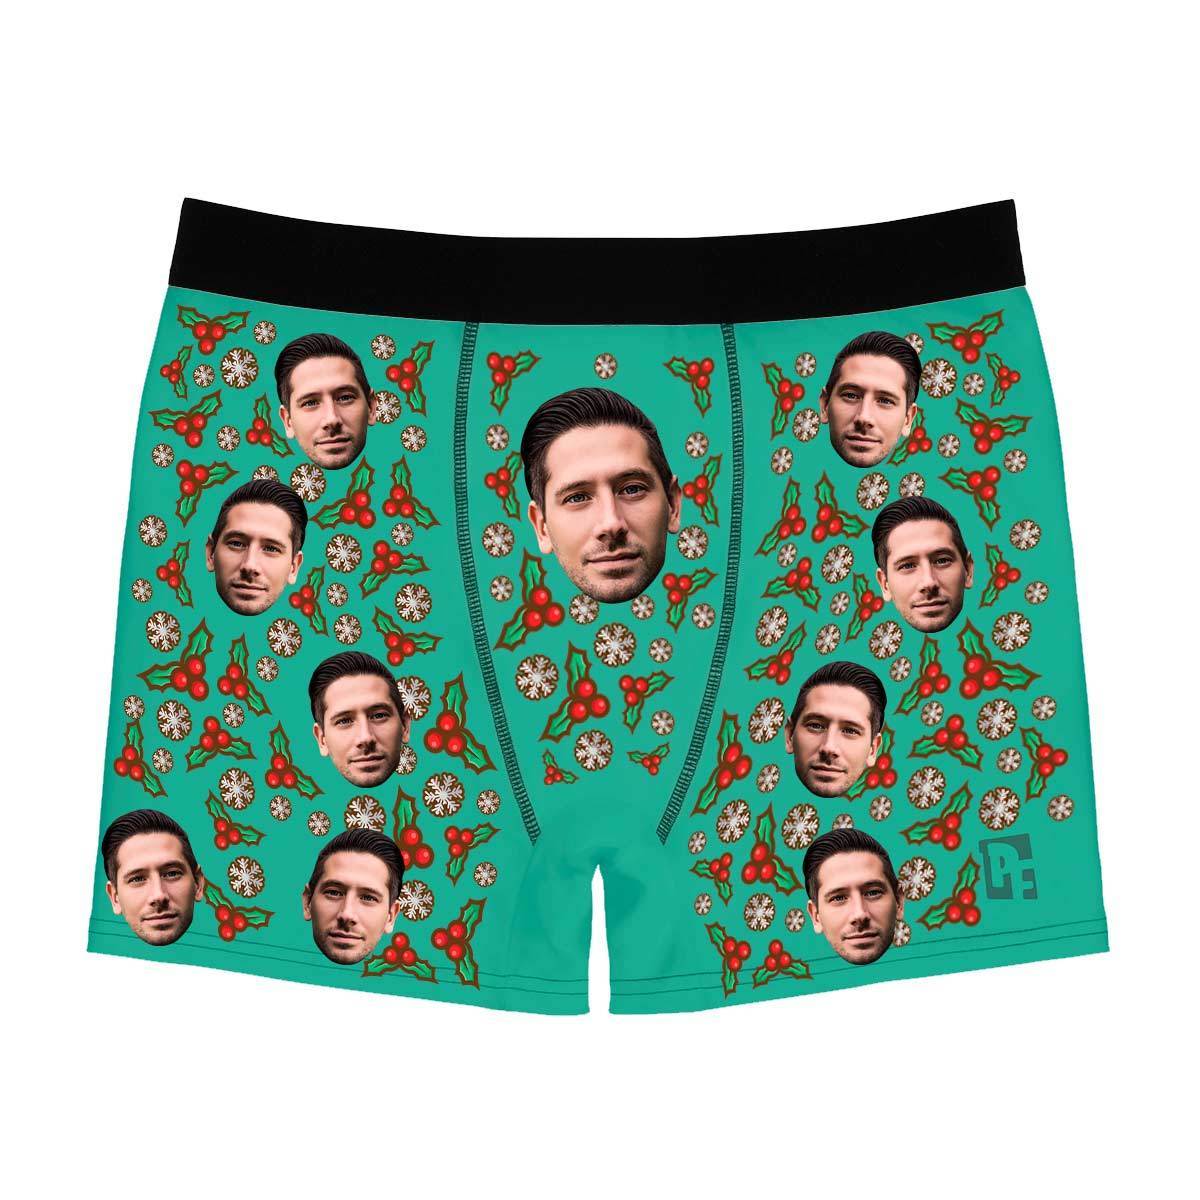 Mint Mistletoe men's boxer briefs personalized with photo printed on them